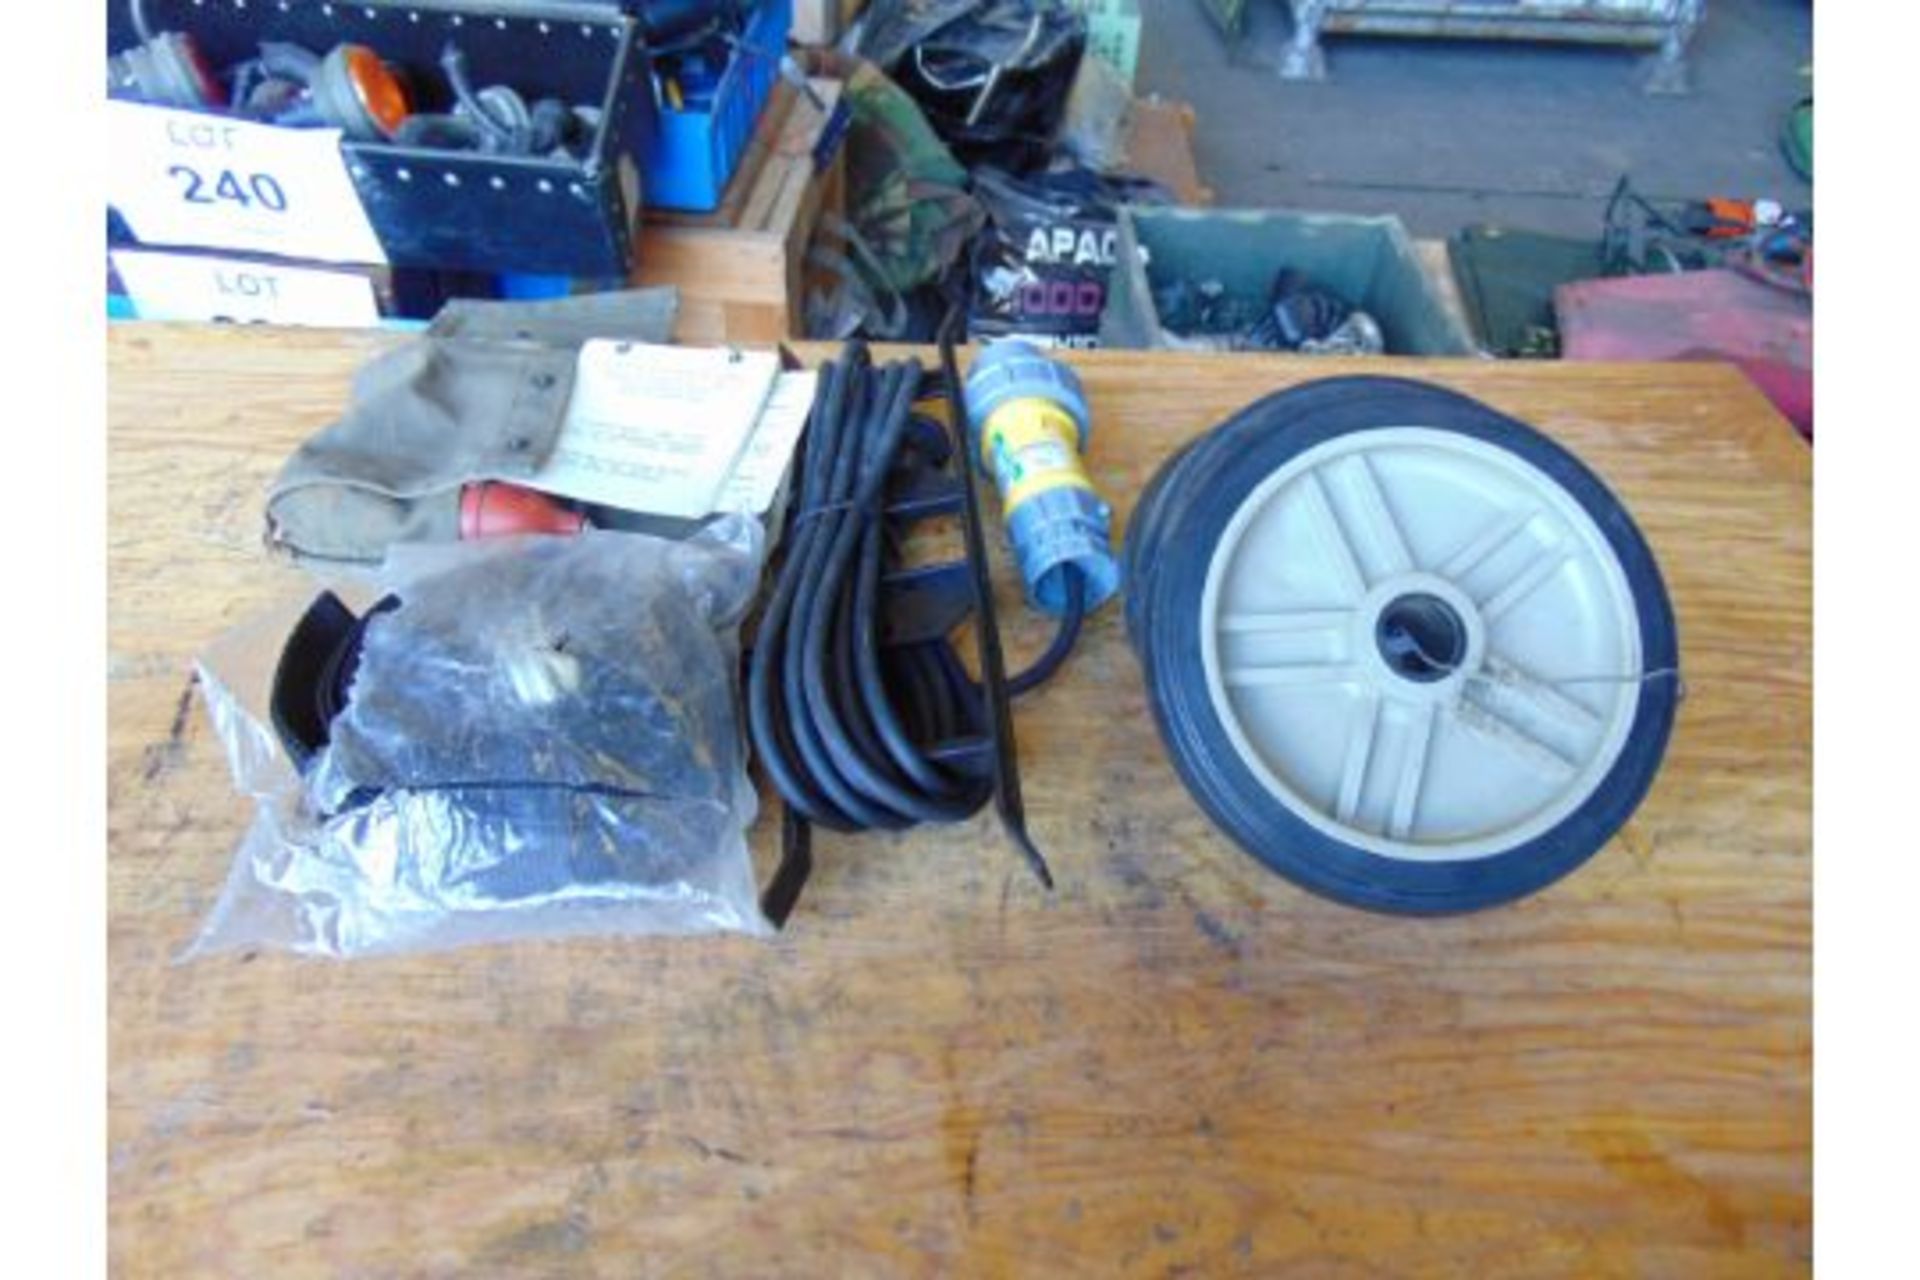 Wheels, Ext Lead, Straps, Chemical Agent Test Kit - Image 2 of 4